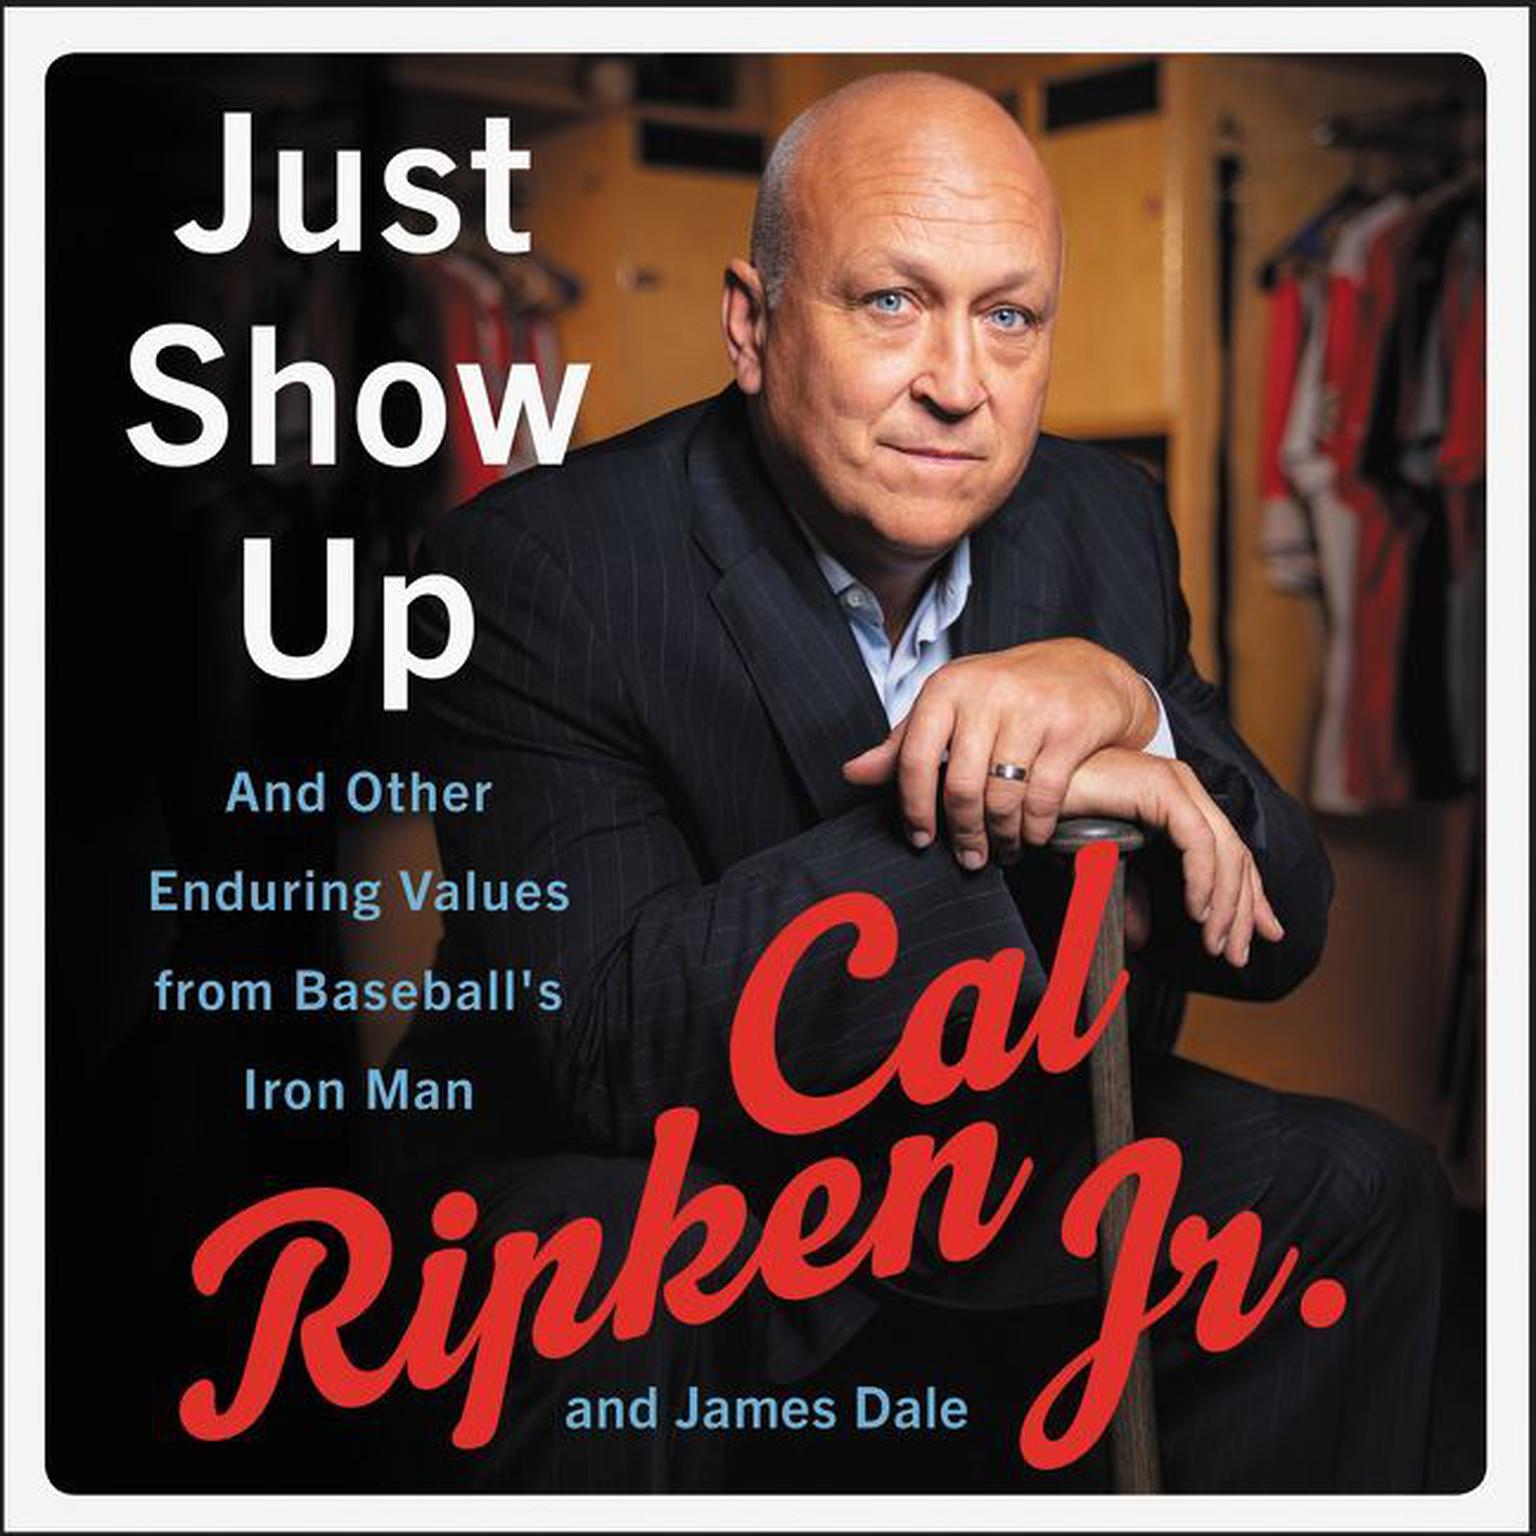 Just Show Up Audiobook by James Dale Love it Guarantee